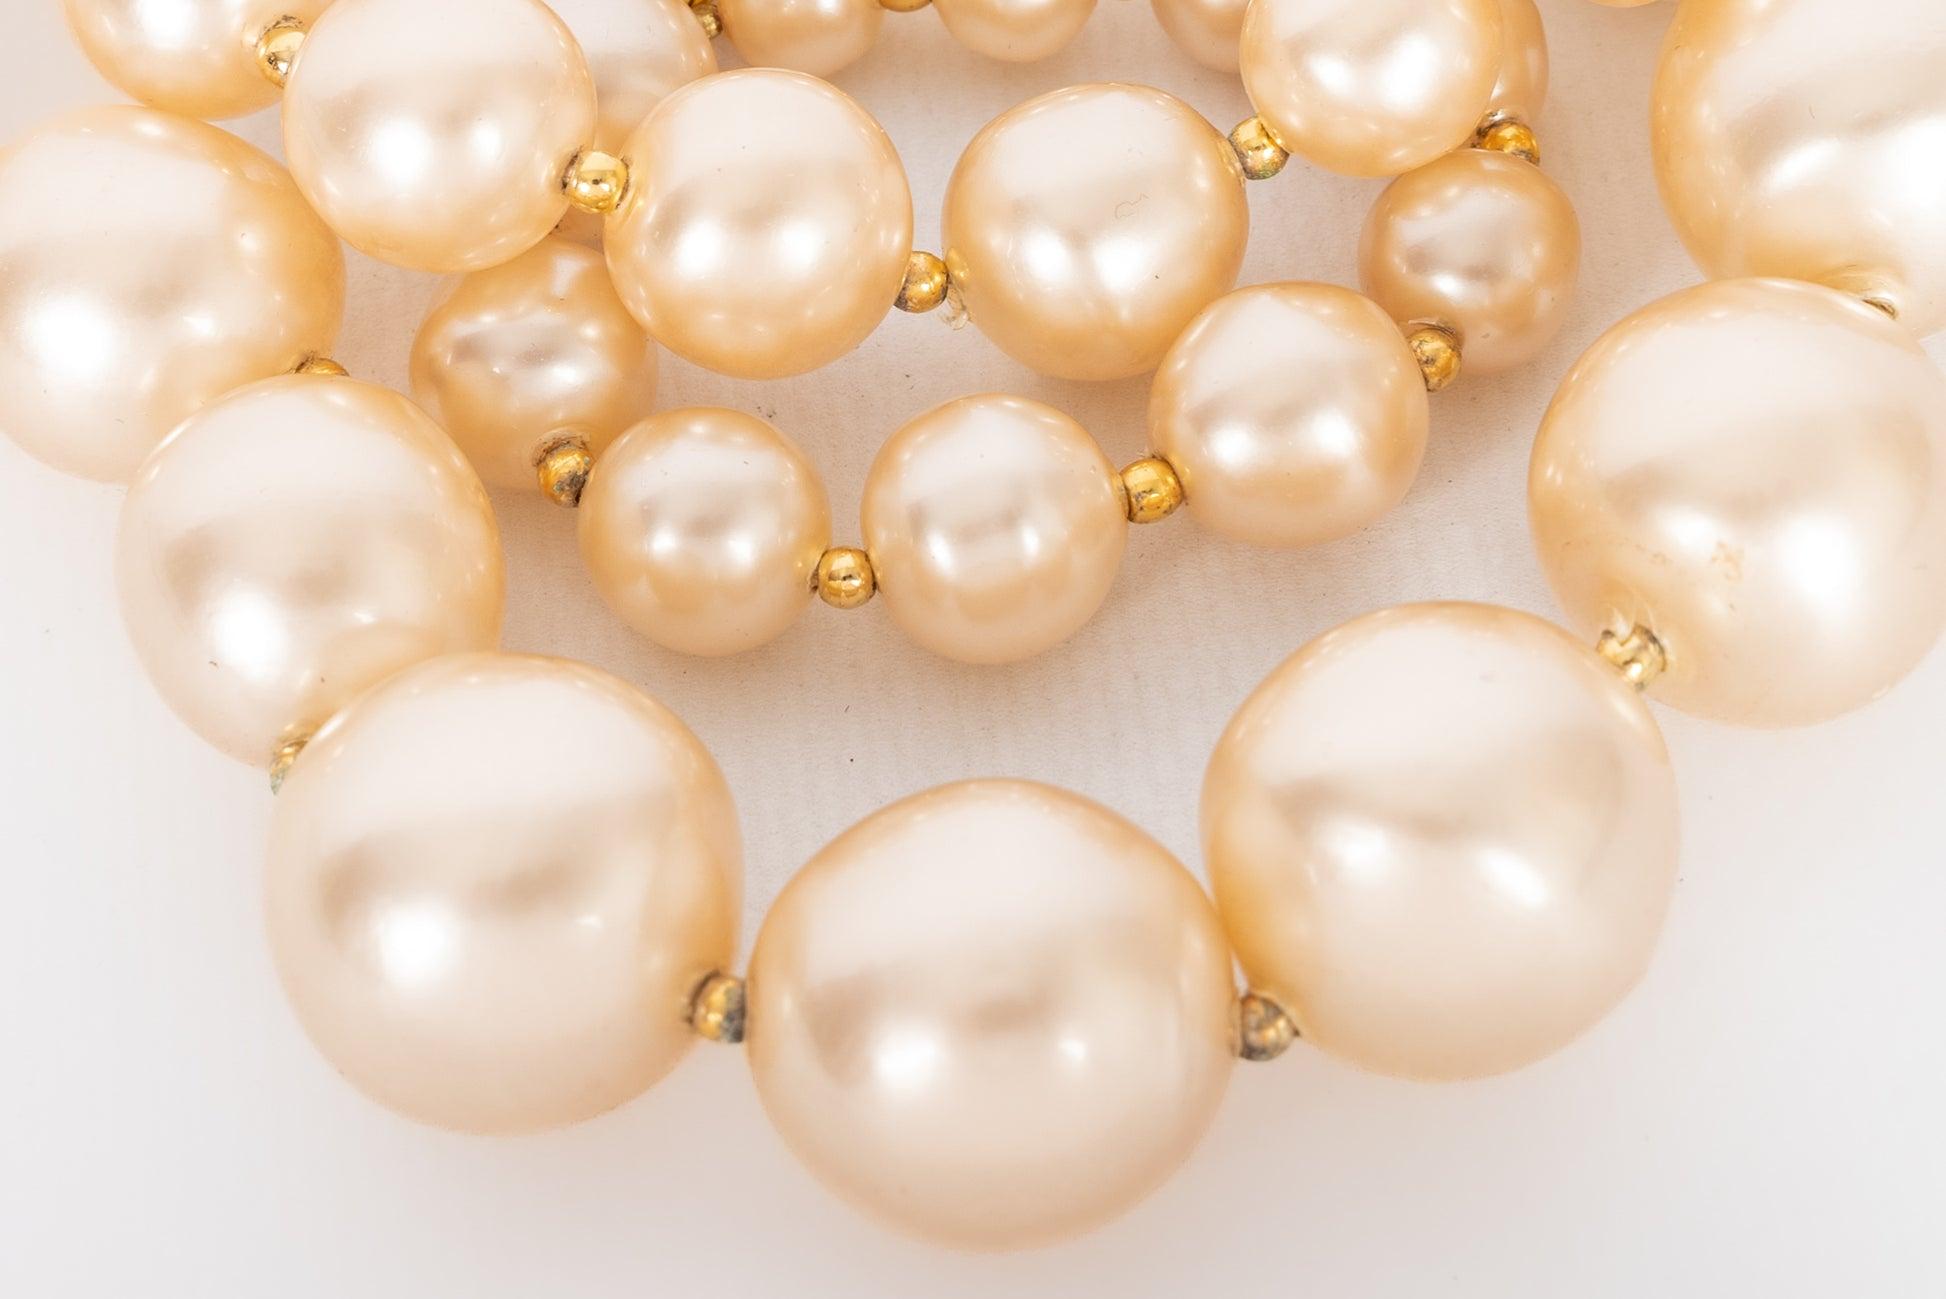 Chanel (Made in France) Necklace in costume pearly beads and gold-plated metal. 2cc9 Collection.

Additional Information:
Condition: Very good condition
Dimensions: Length: 80 cm
Period: 20th Century

Seller Reference: CB173